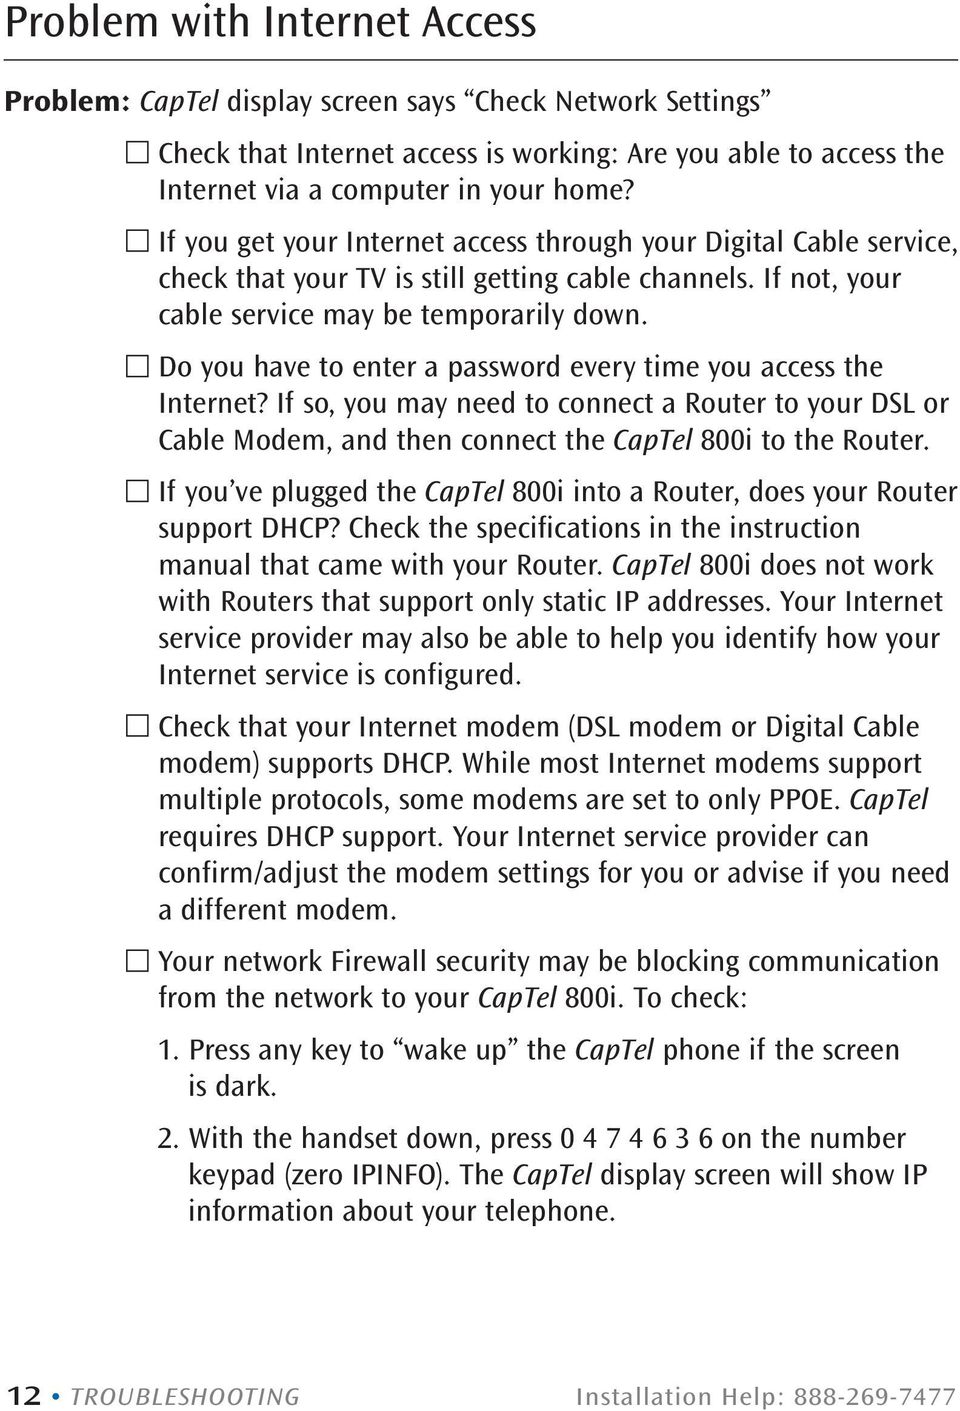 Do you have to enter a password every time you access the Internet? If so, you may need to connect a Router to your DSL or Cable Modem, and then connect the CapTel 800i to the Router.